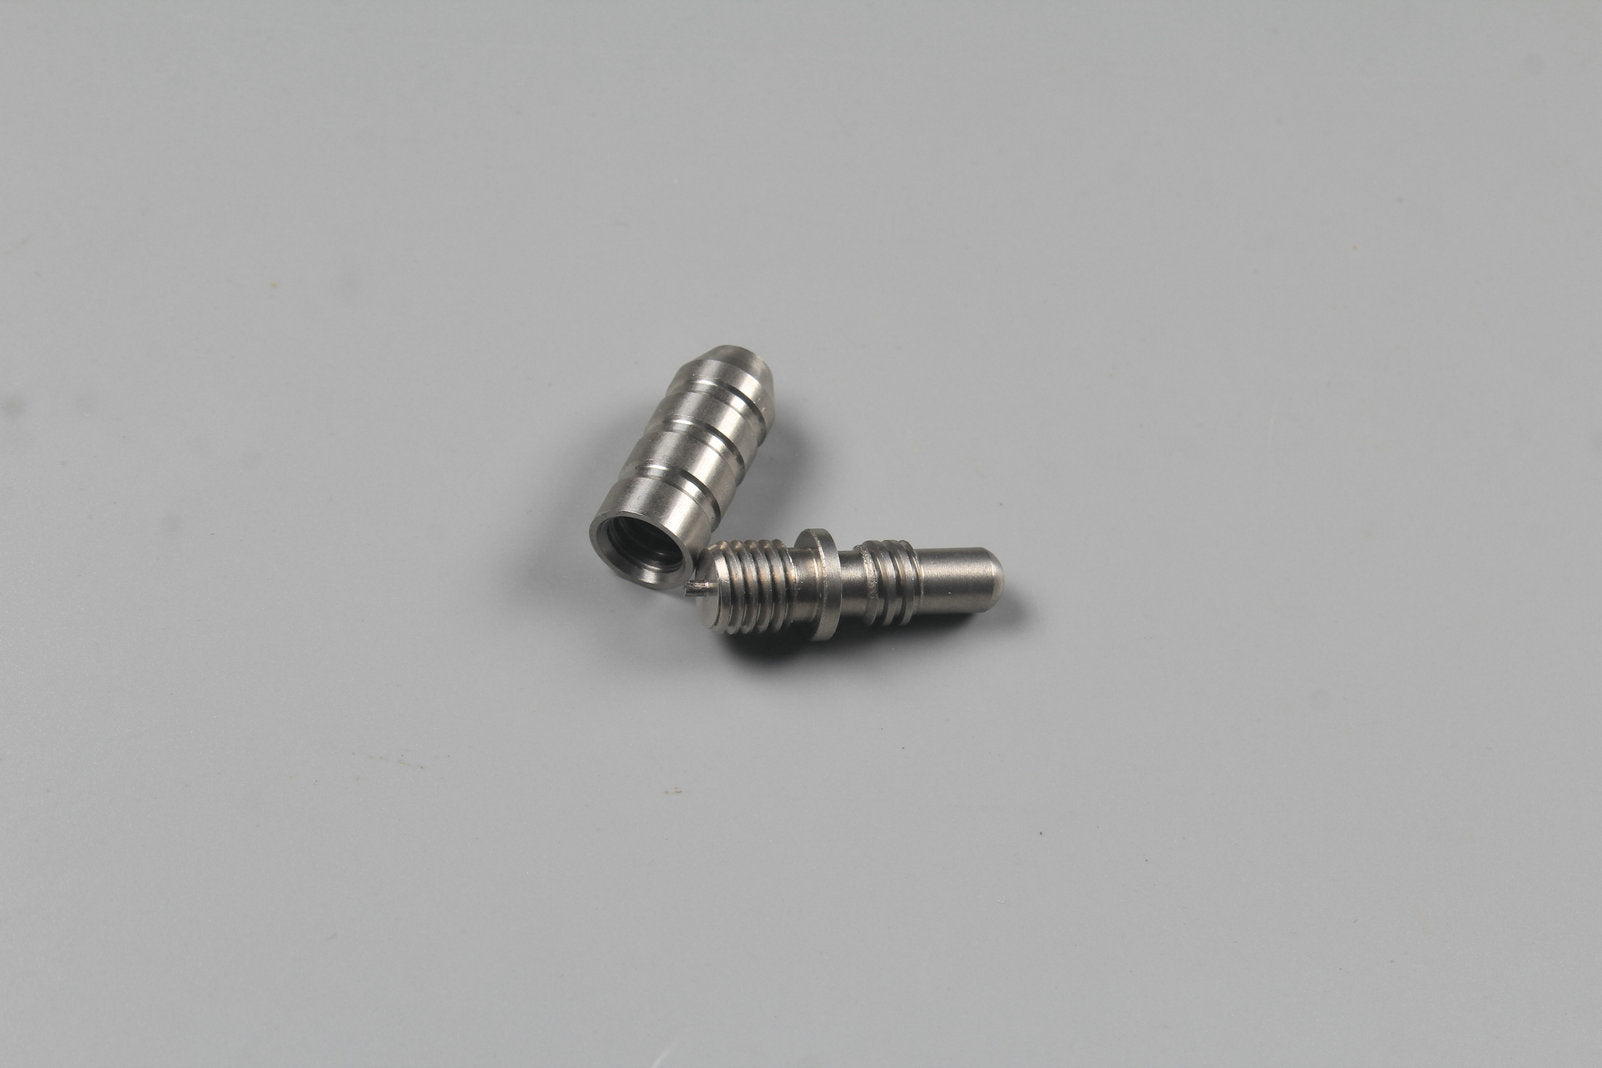 cue butt end joint stainless steel pin and socket for SD mini butt or extension